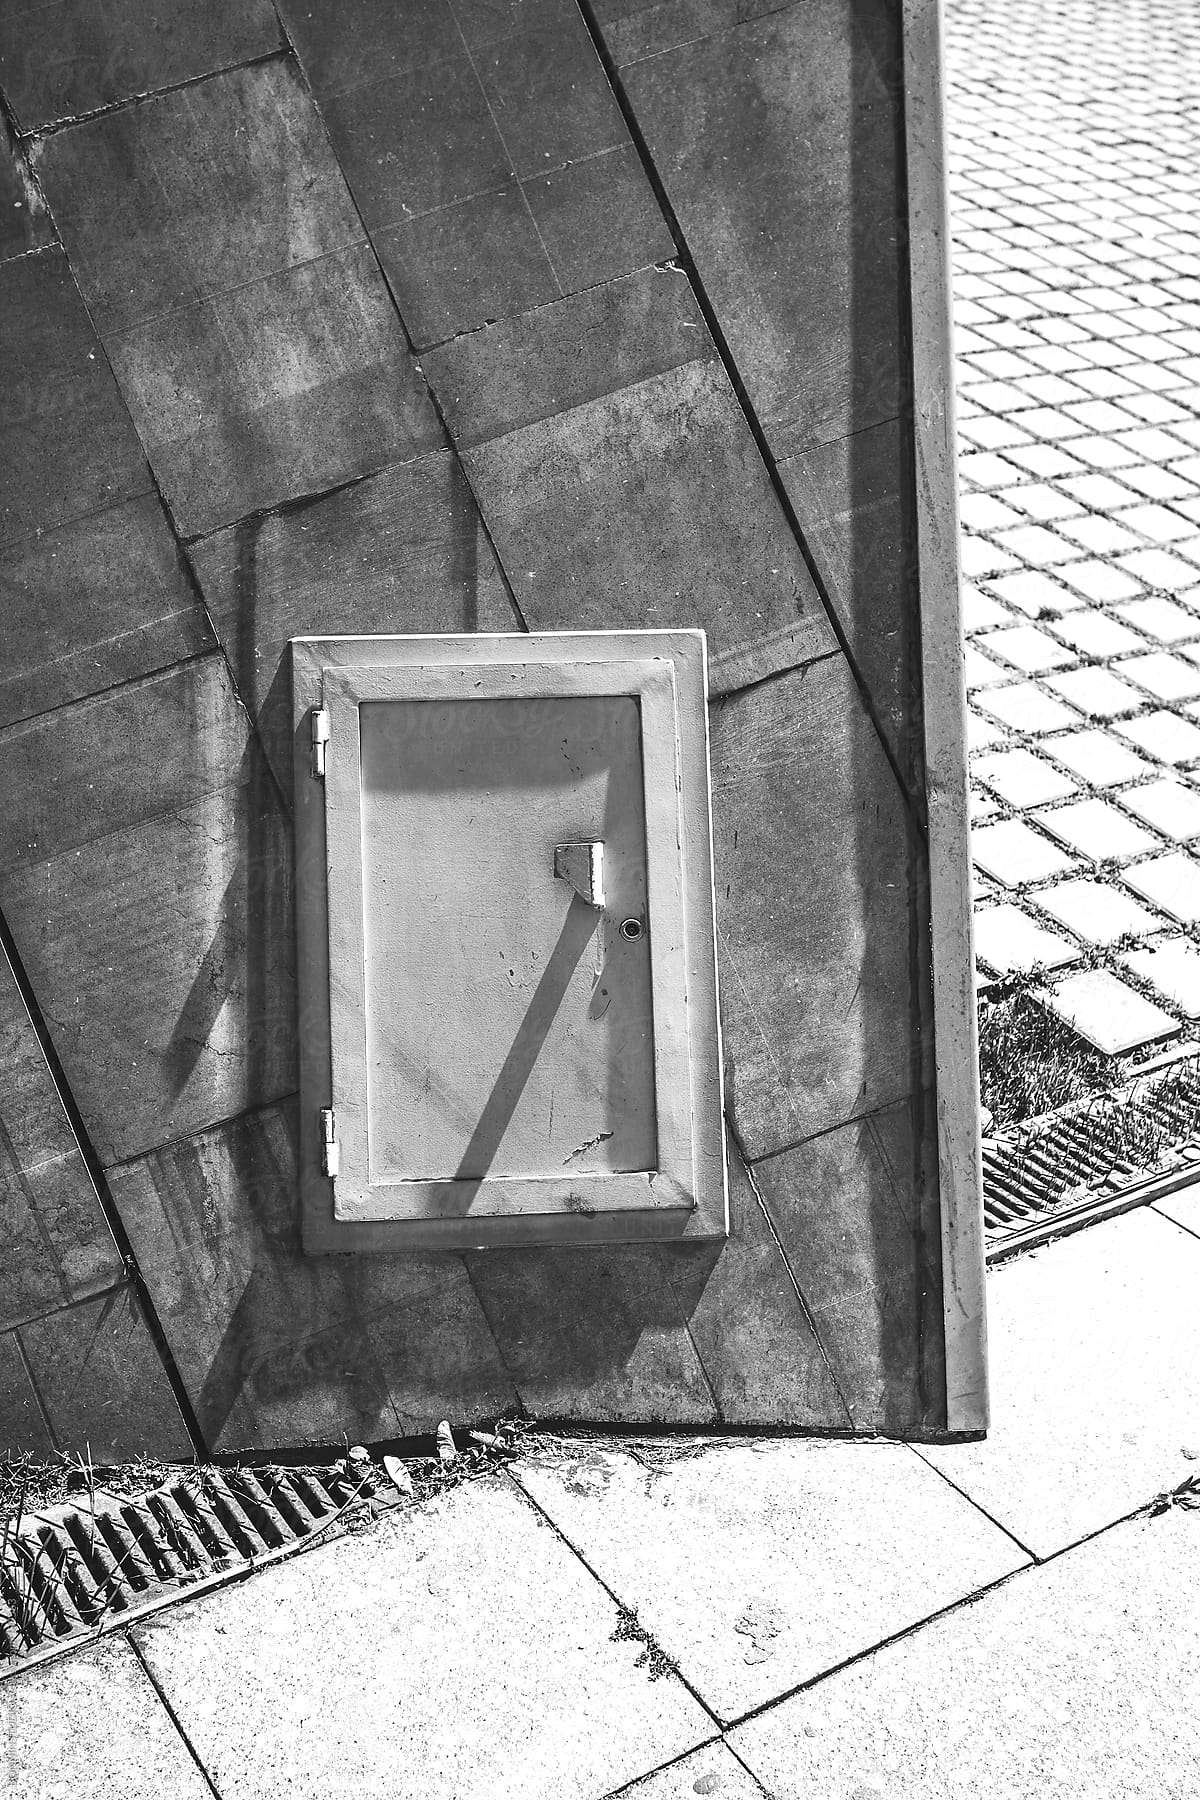 Little door. Abstract forms on a urban landscape. Barcelona.